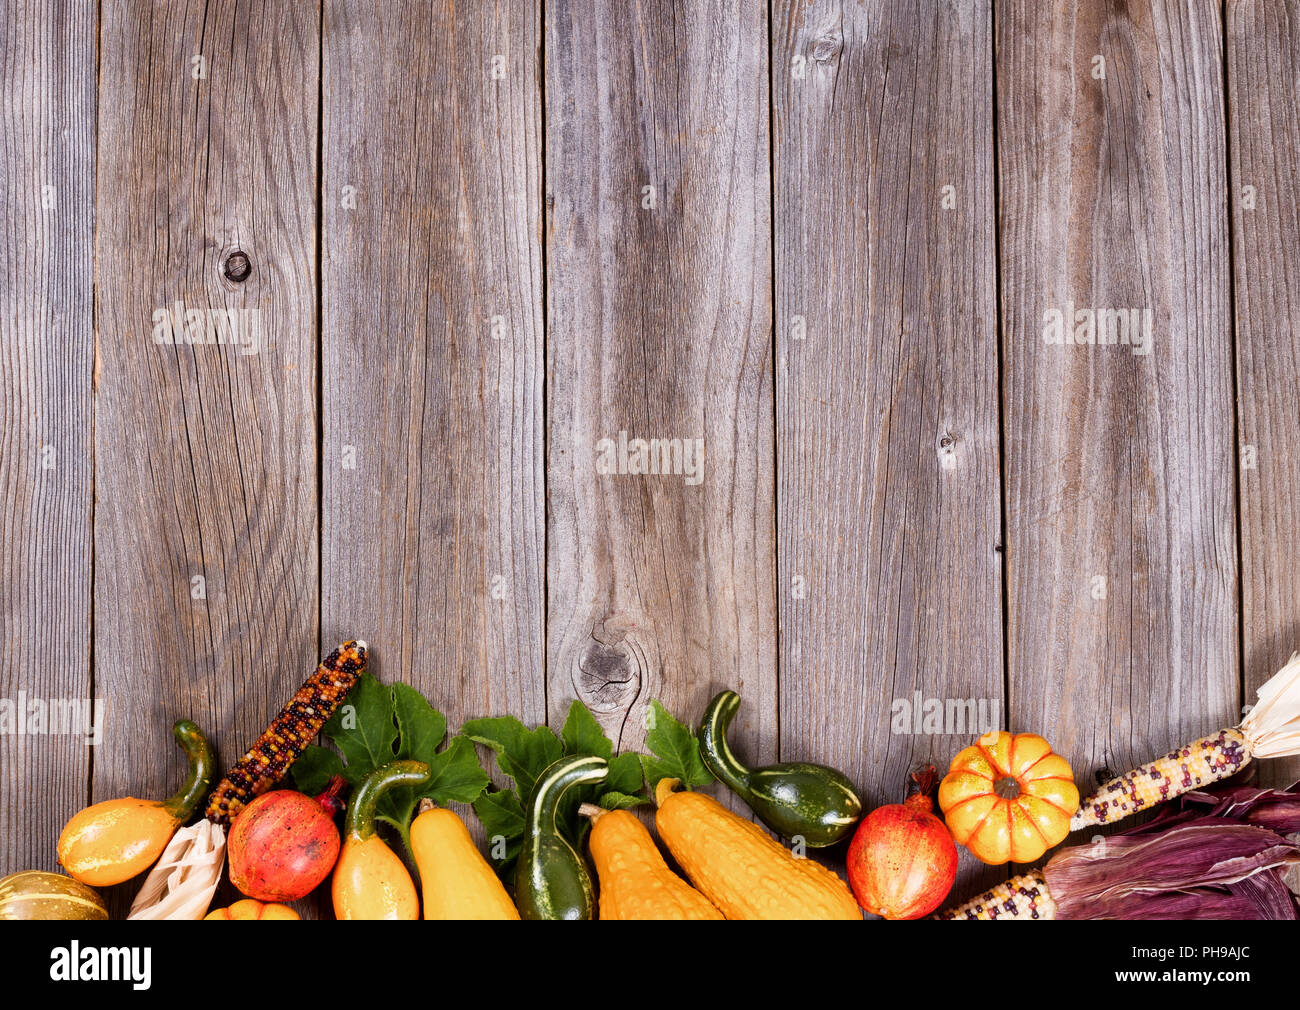 Mixed seasonal autumn vegetables on rustic wooden boards Stock Photo